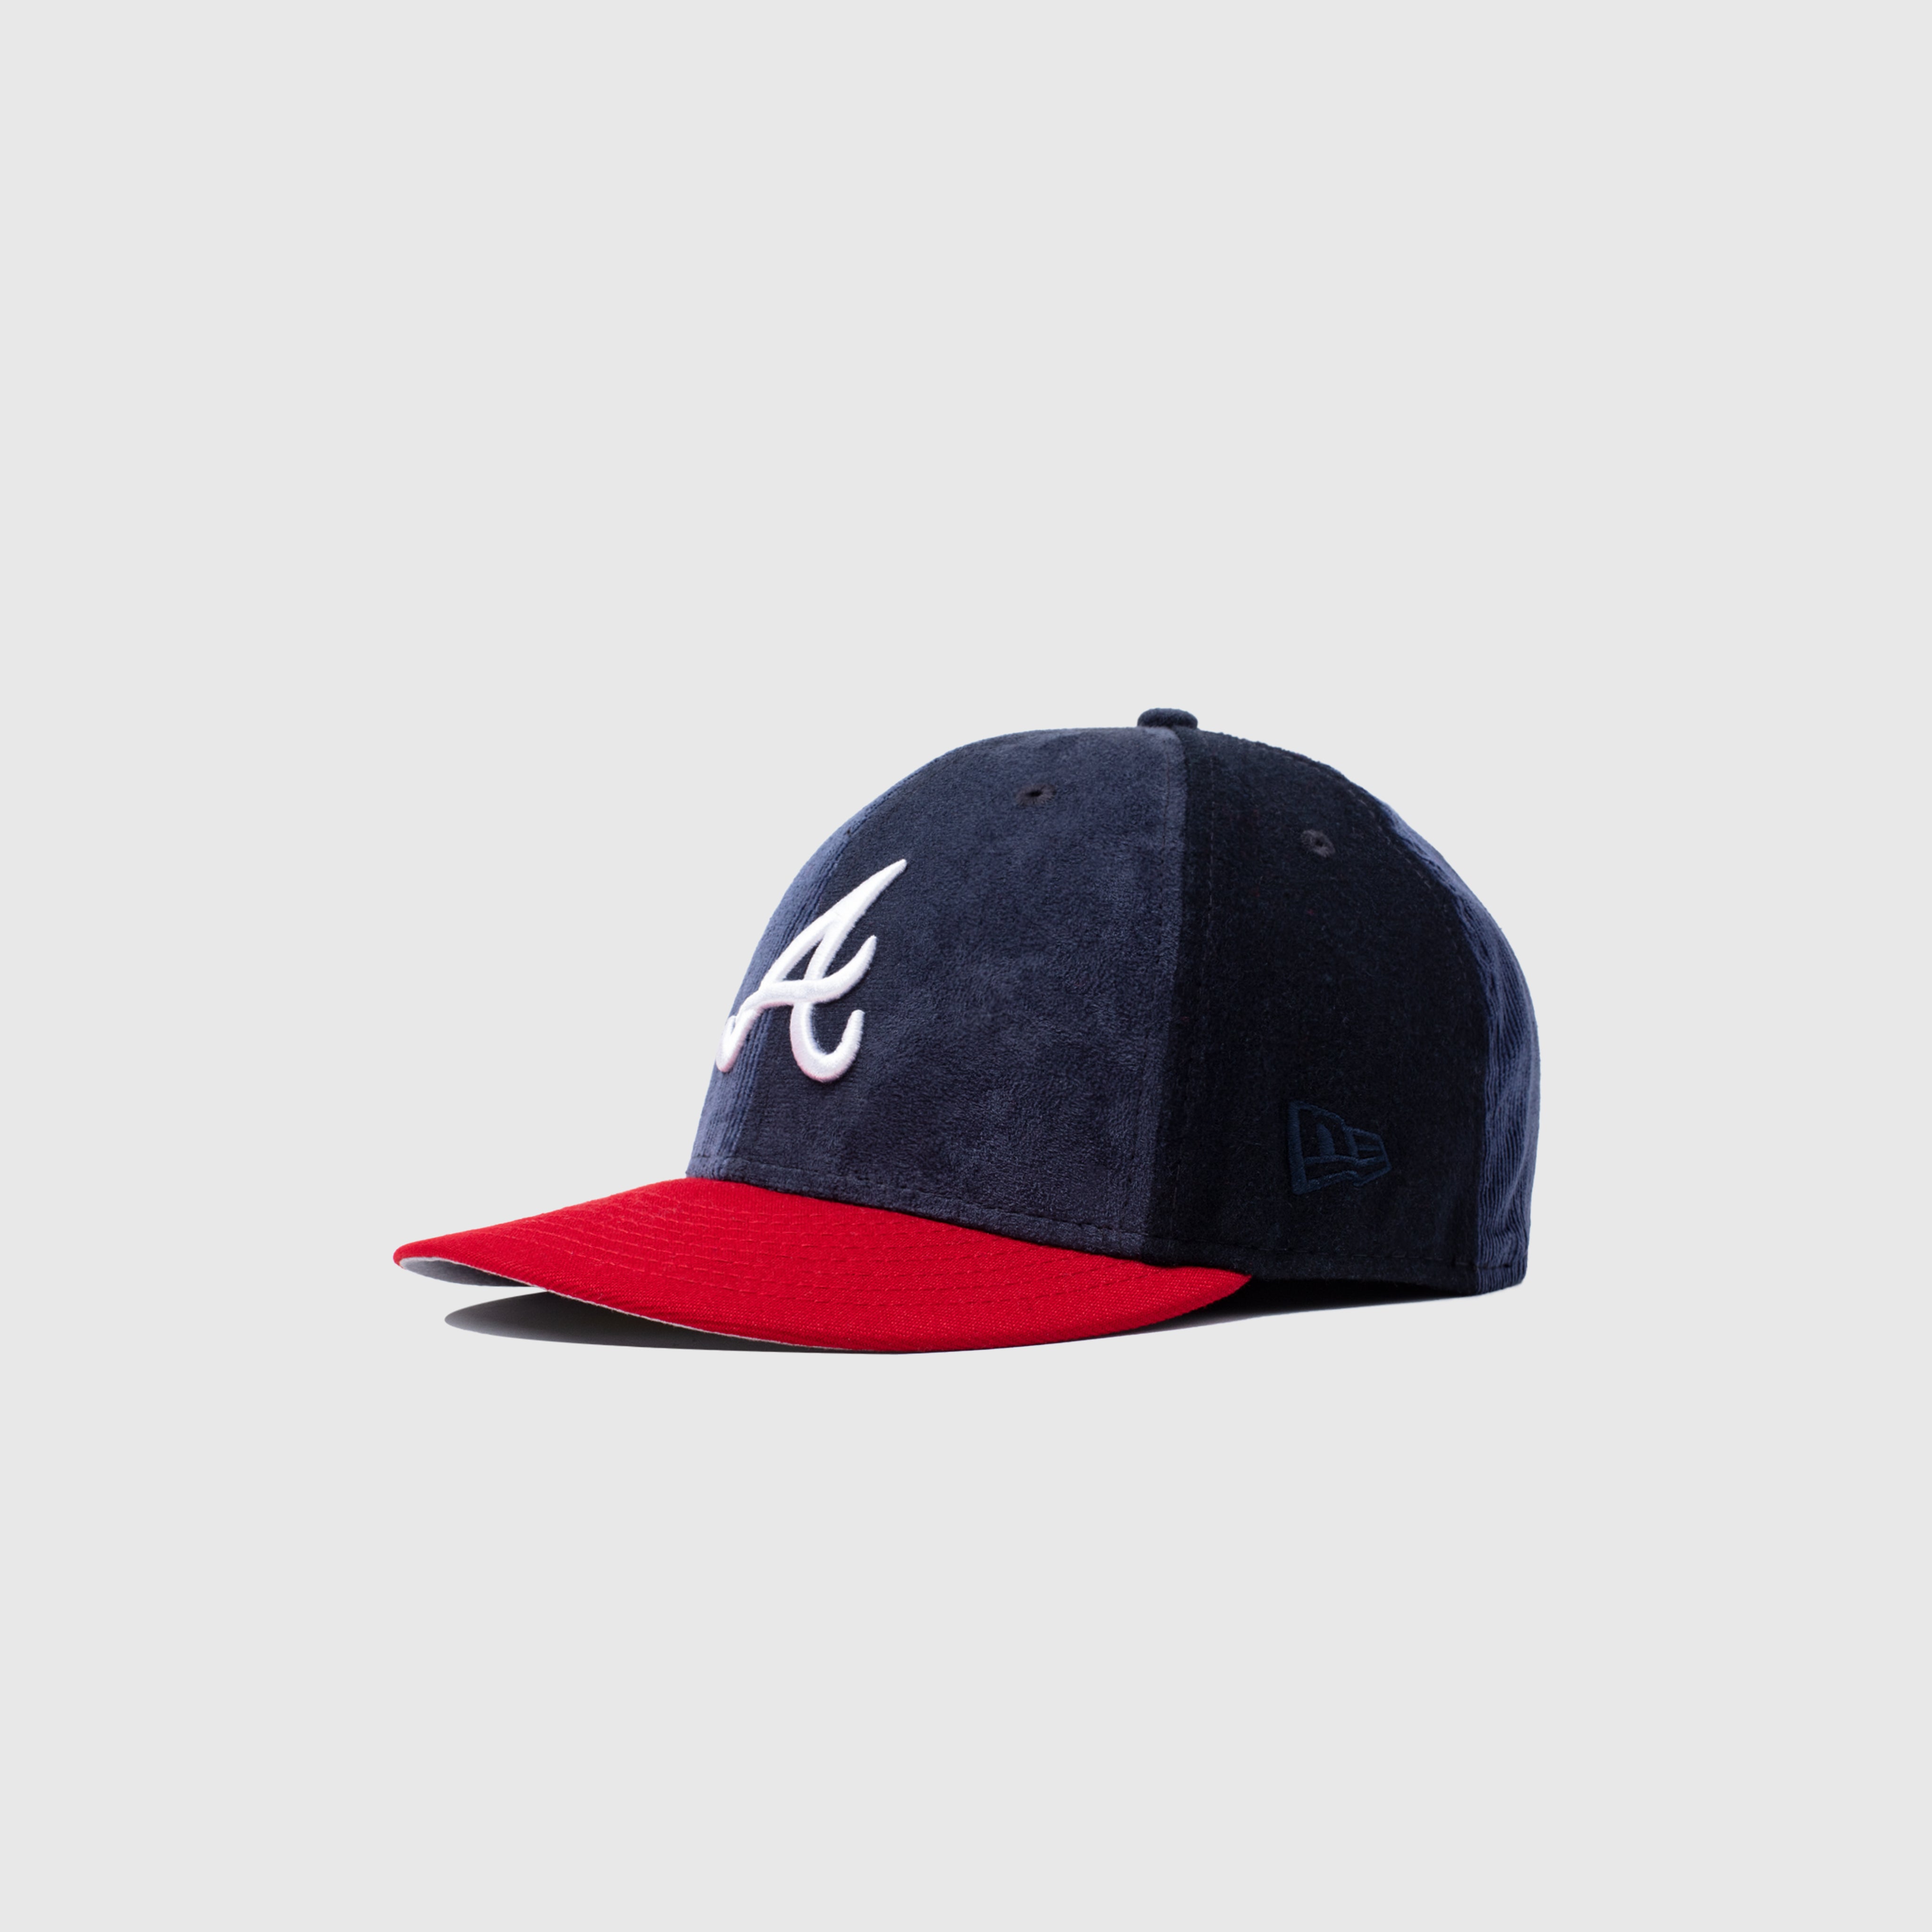 Buy MLB Atlanta Braves White on White 59FIFTY Fitted Cap, 7 3/8 Online at  Low Prices in India 